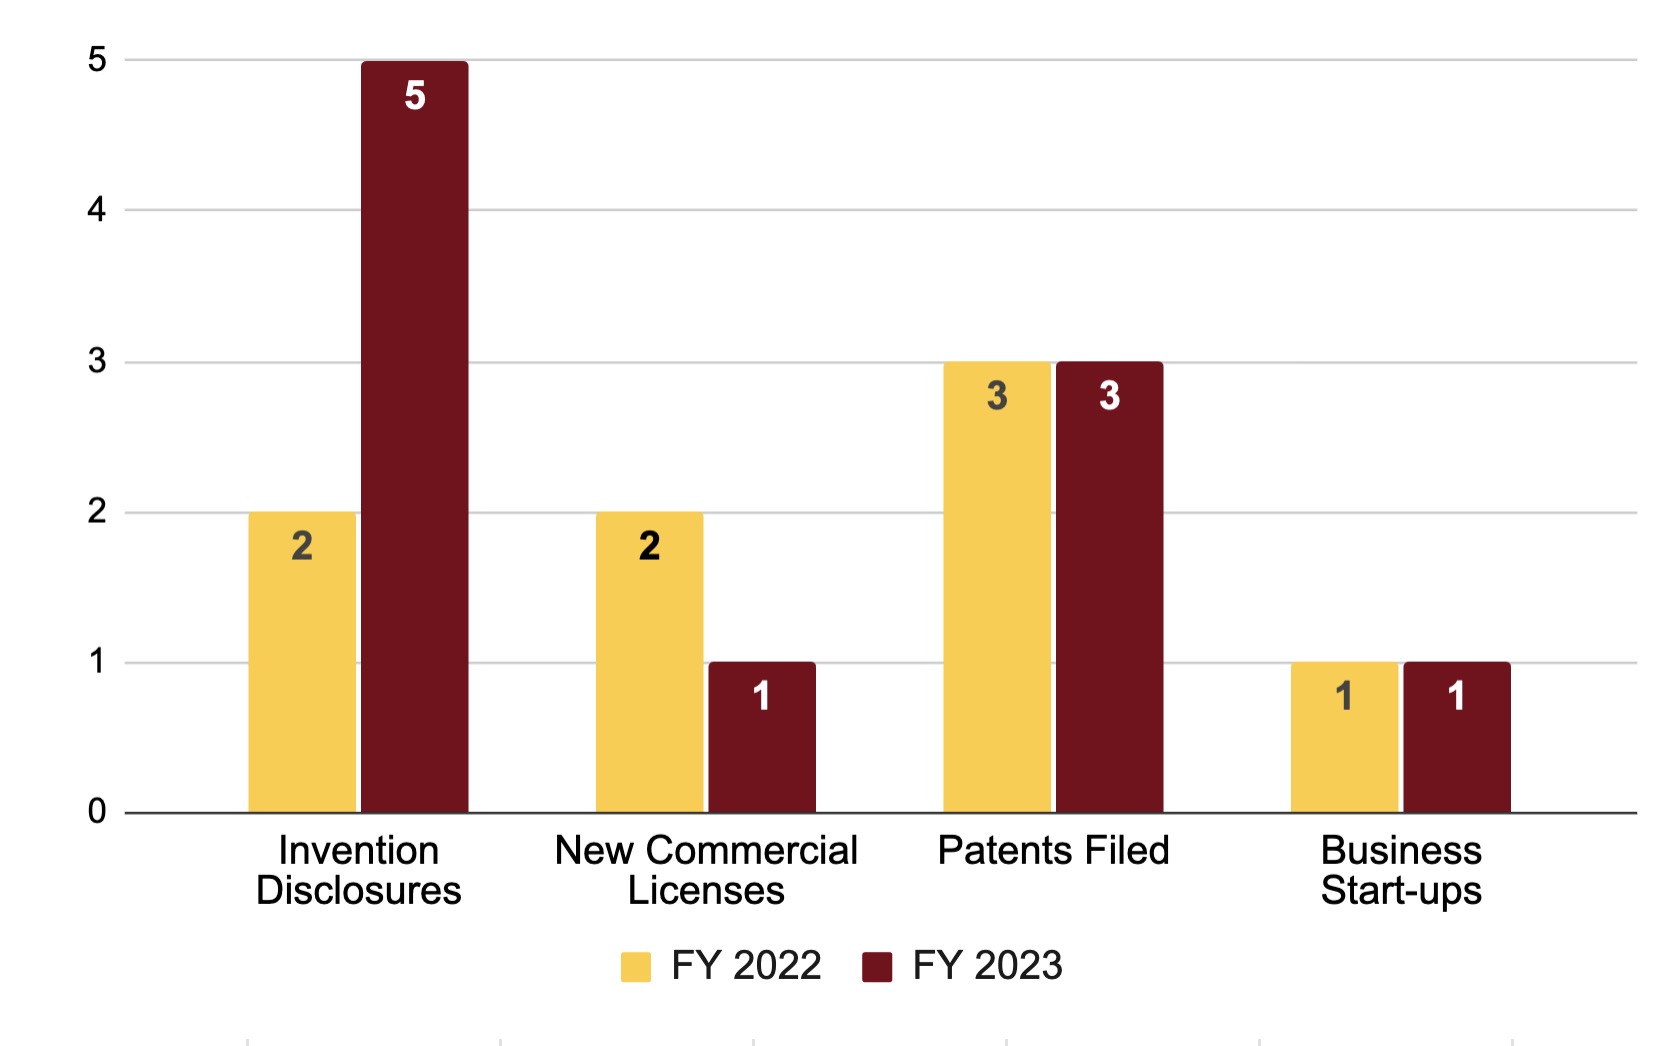 Chart: Invention Disclosures: 2 in FY 2022, 5 in FY 2023; New Commercial Licenses: 2 in FY 2022, 1 in FY 2023; Patents Filed: 3 in both FY 2022 and FY 2023; Business Start-ups: 1 in both FY 2022 and FY 2023